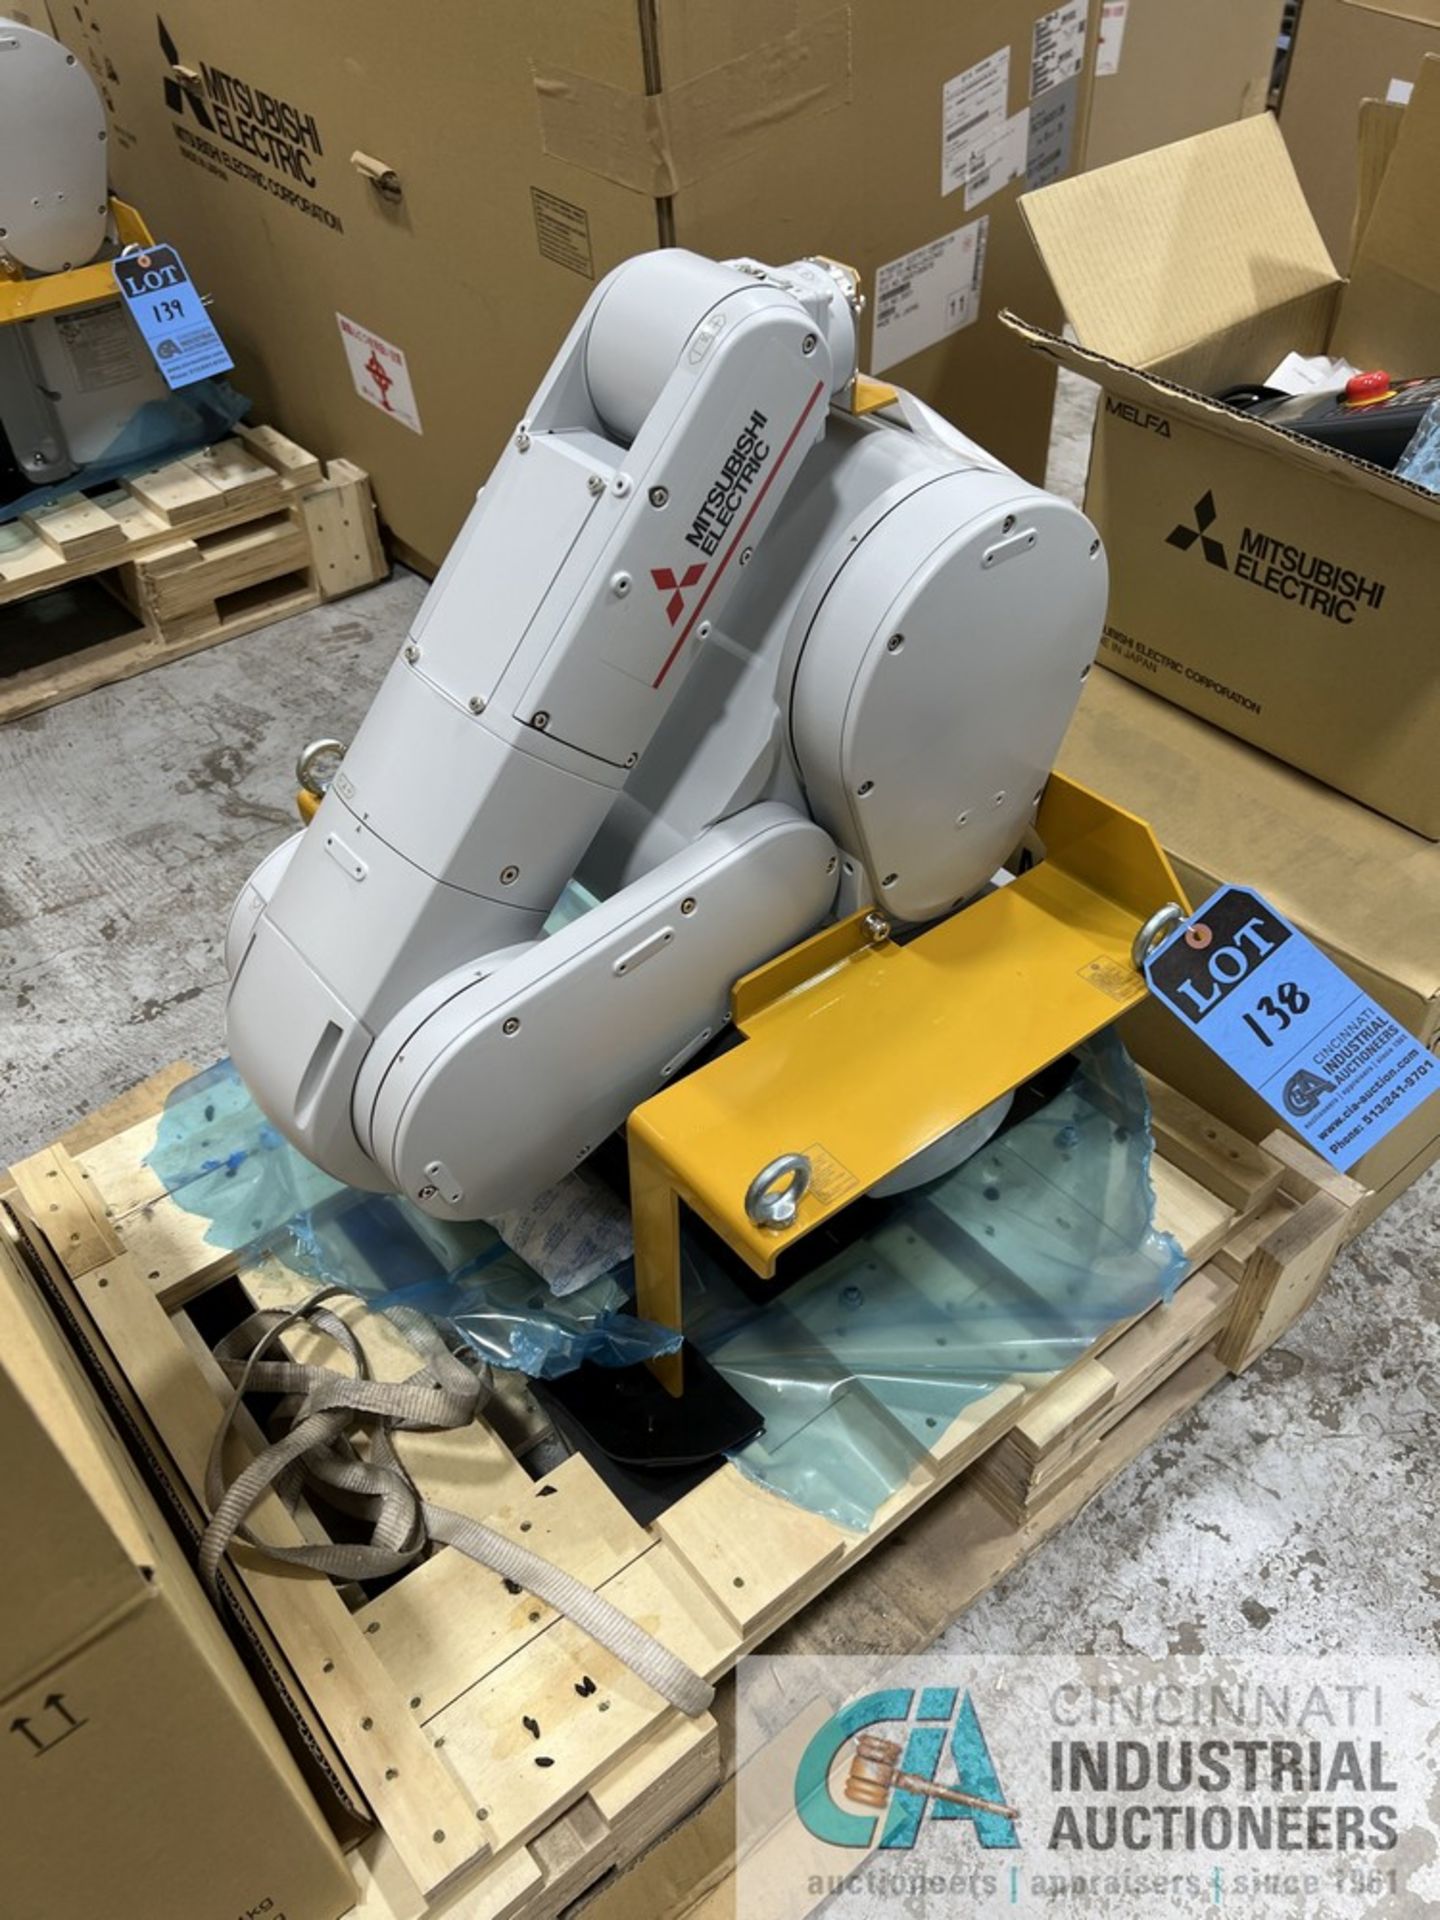 7 KG MITSUBISHI MODEL RV7FRD 6-AXIS ROBOT; S/N BC1020051R, CR800-07VD CONTROLLER, R32TB PENDANT, - Image 2 of 9